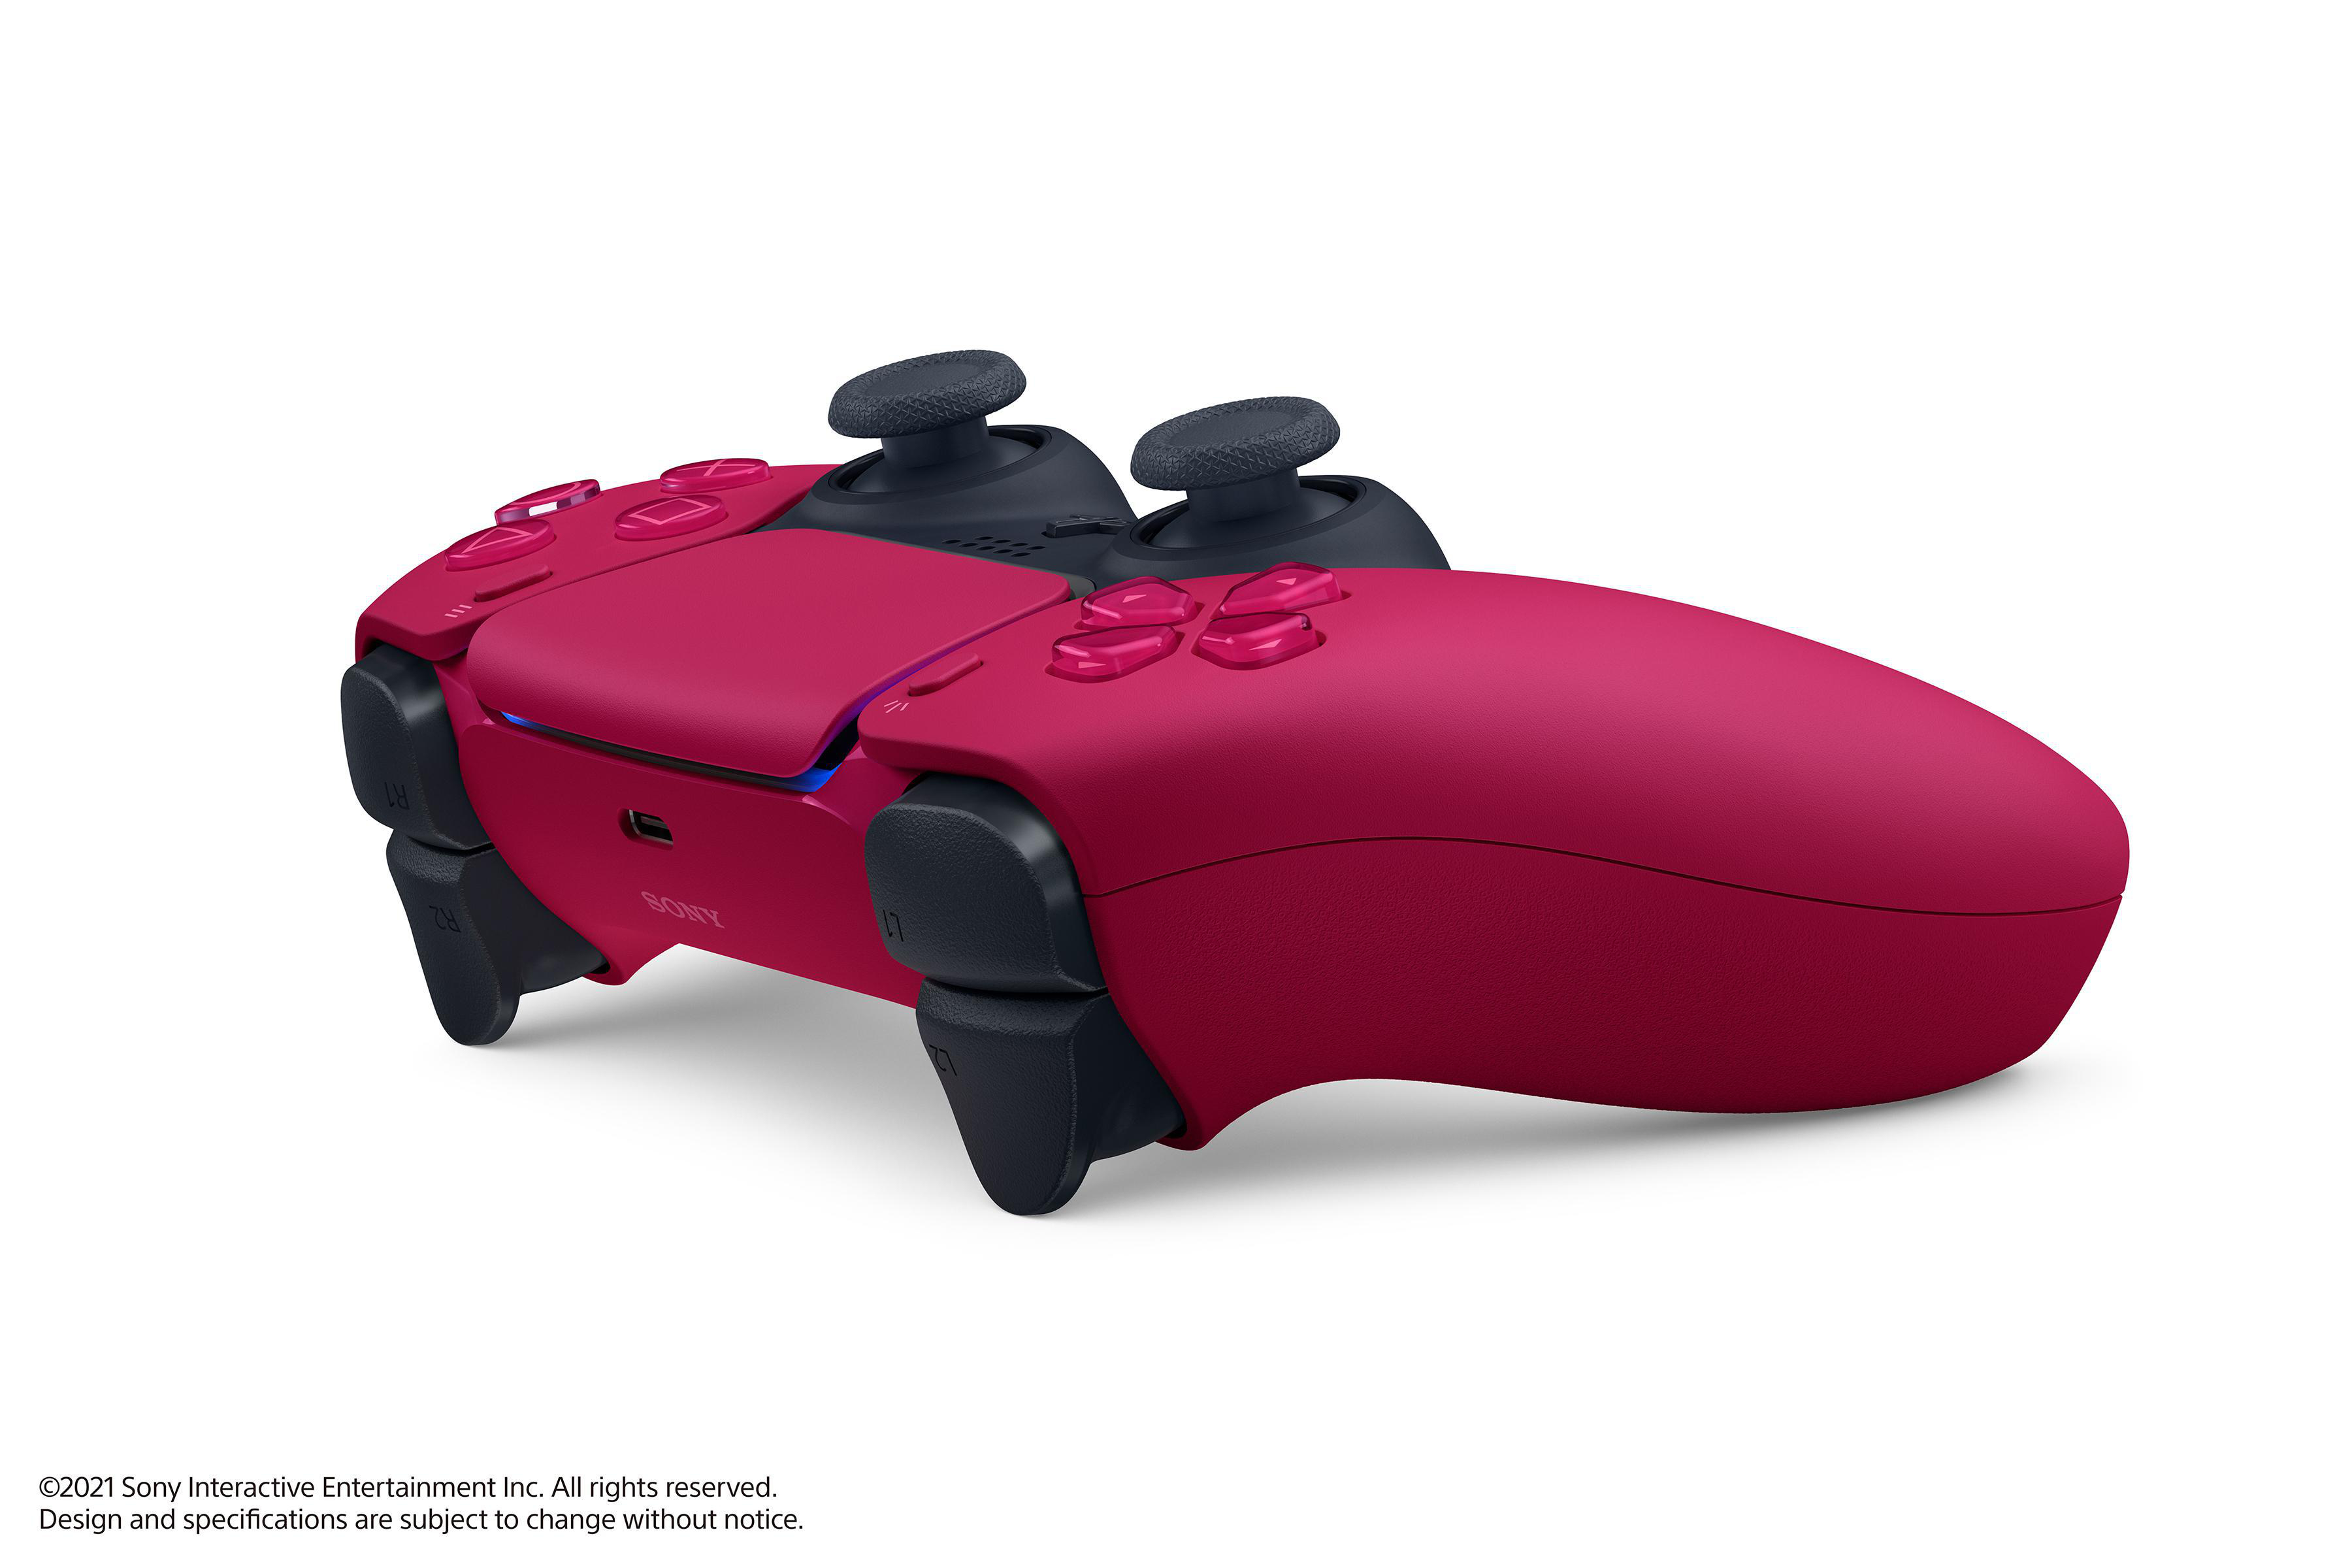 SONY DualSense® Wireless-Controller für iOS PlayStation 5, Red Android, MAC, Cosmic